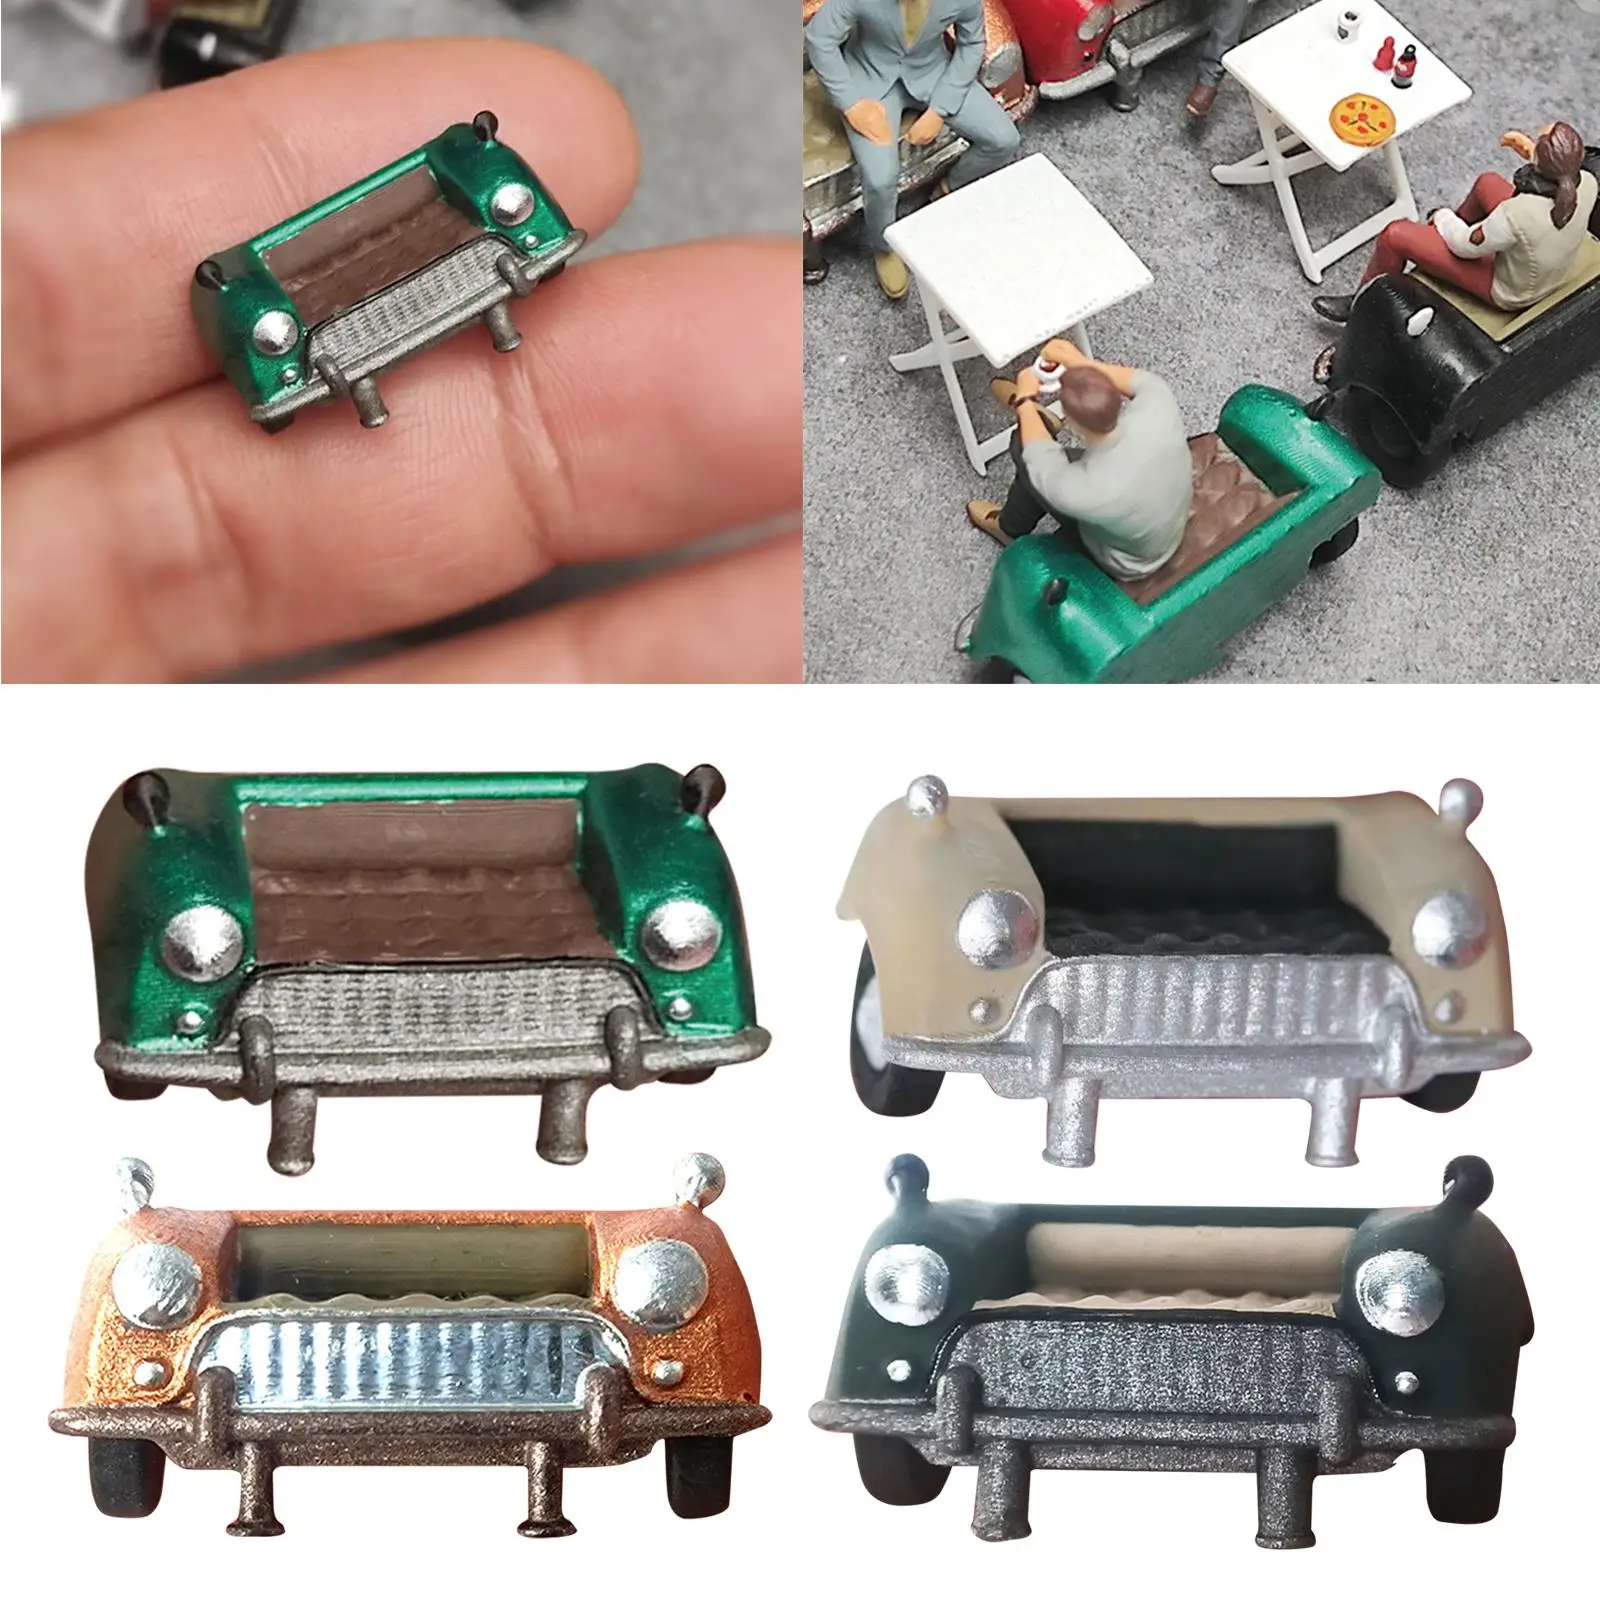 1/64 Painted Resin Sofa Model Scene Street Layout Diorama Collectibles Gifts